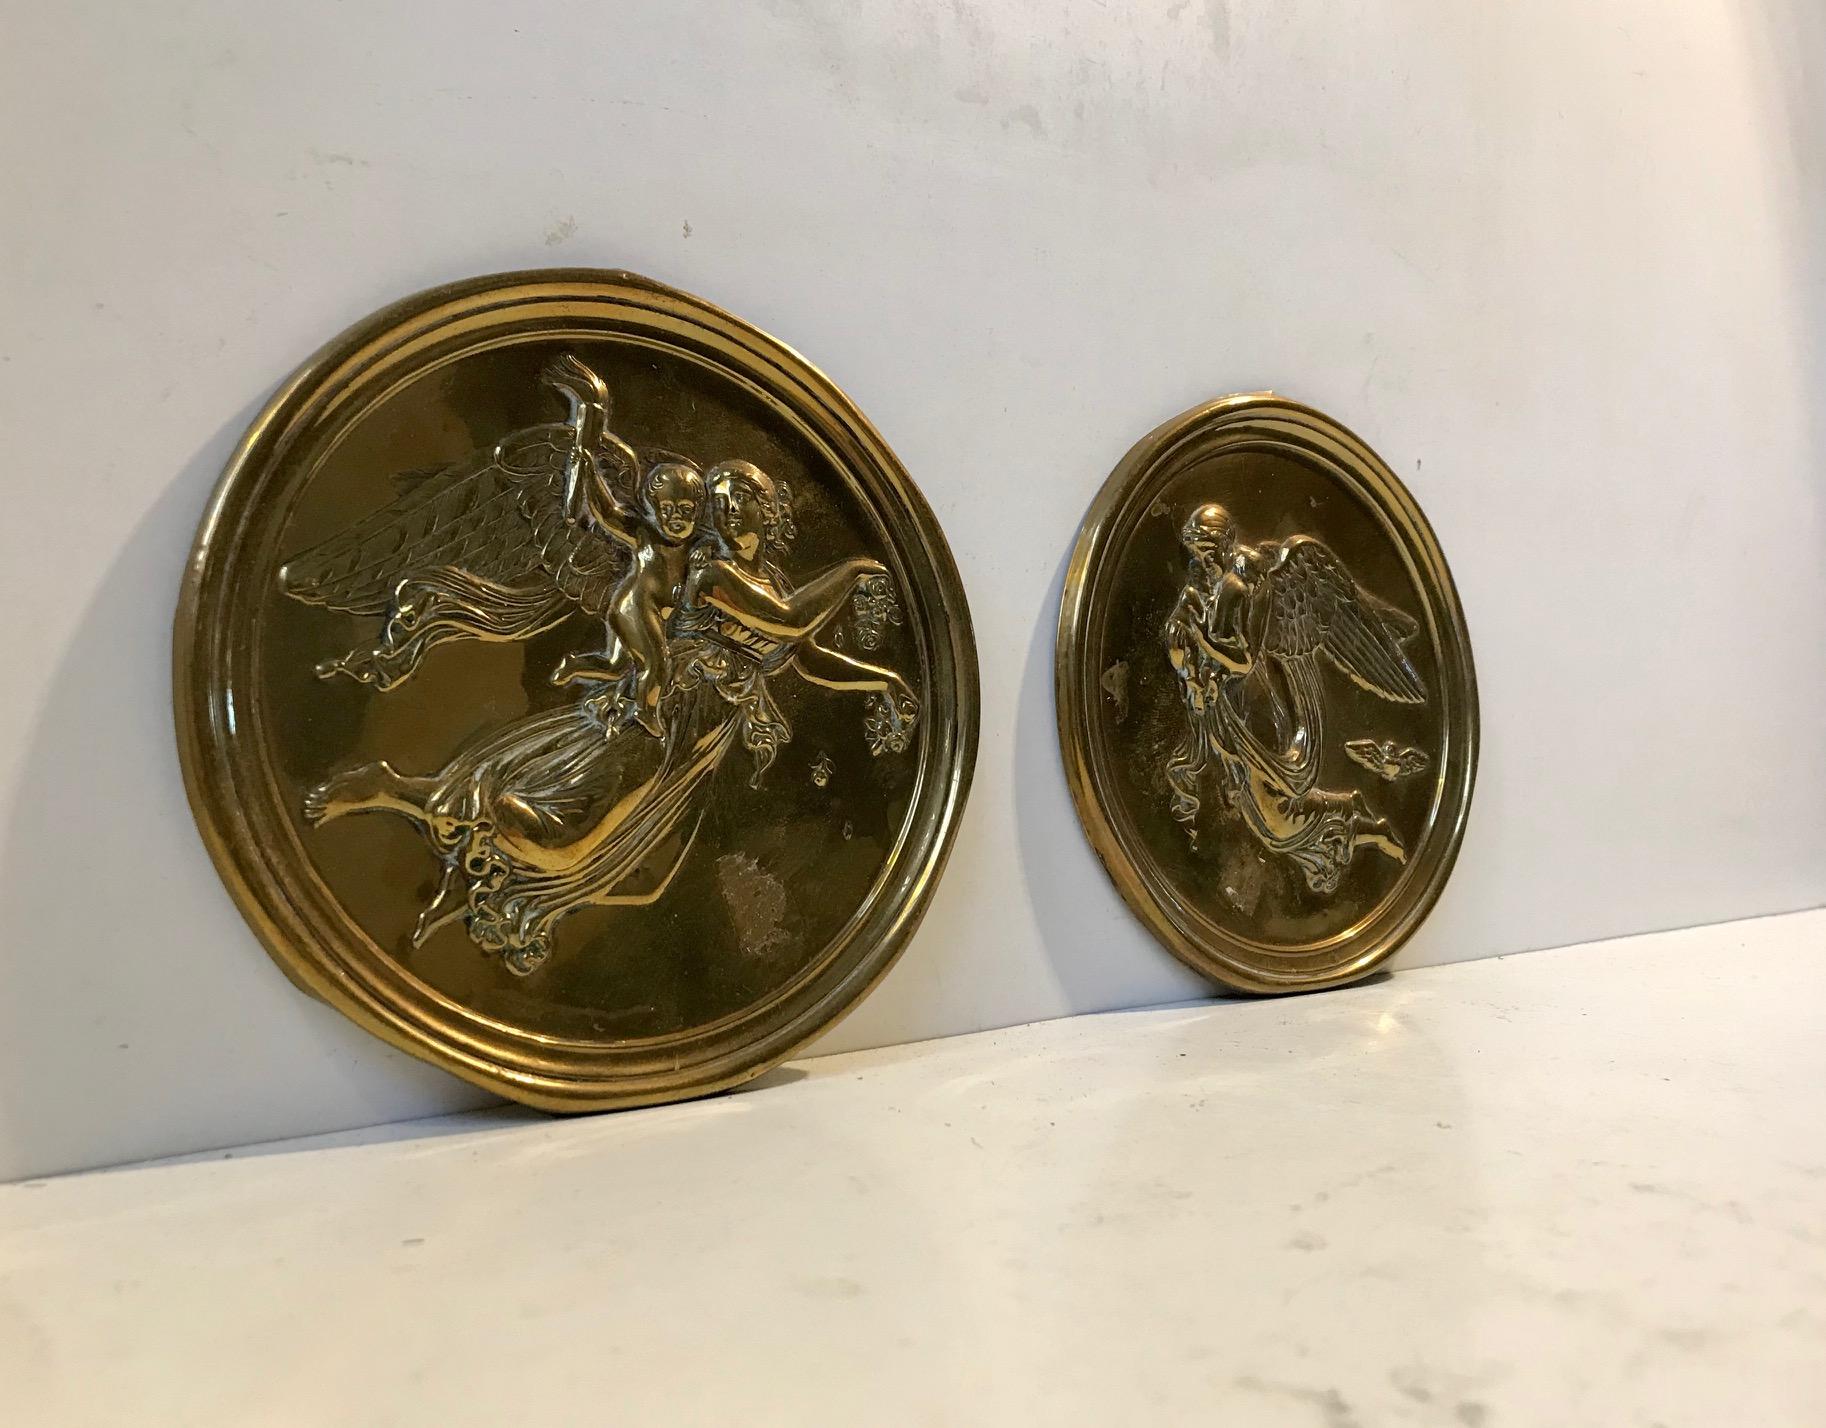 Decorative and detailed wall plaques in tin brass (very thin brass). Made in England, circa 1870-1890. Great for vanity areas, corridors etc.